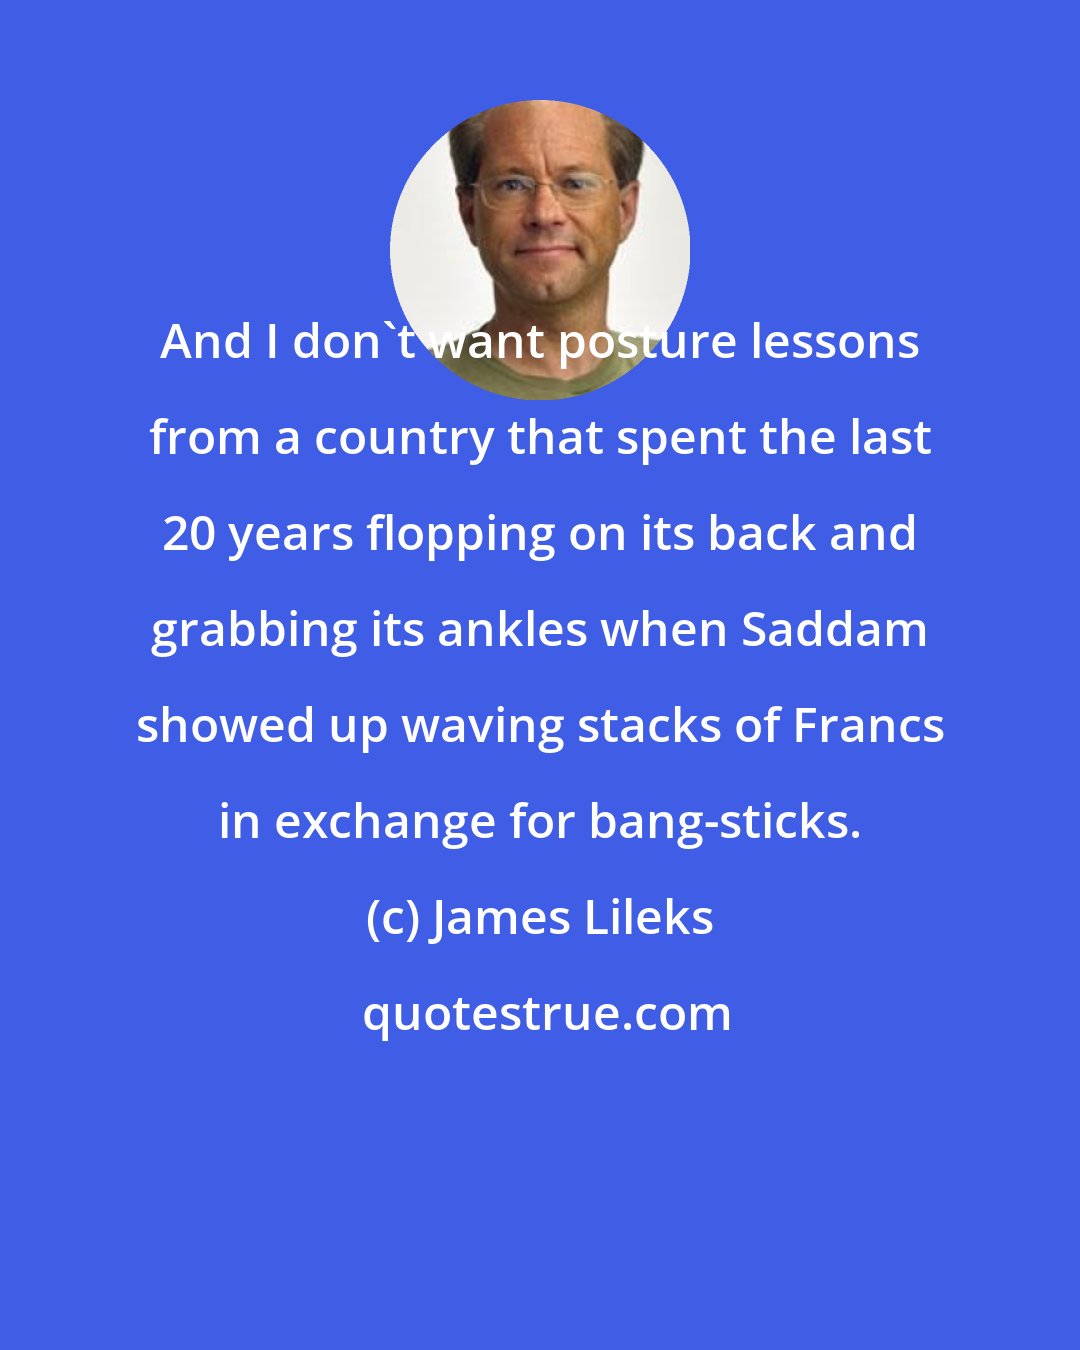 James Lileks: And I don't want posture lessons from a country that spent the last 20 years flopping on its back and grabbing its ankles when Saddam showed up waving stacks of Francs in exchange for bang-sticks.